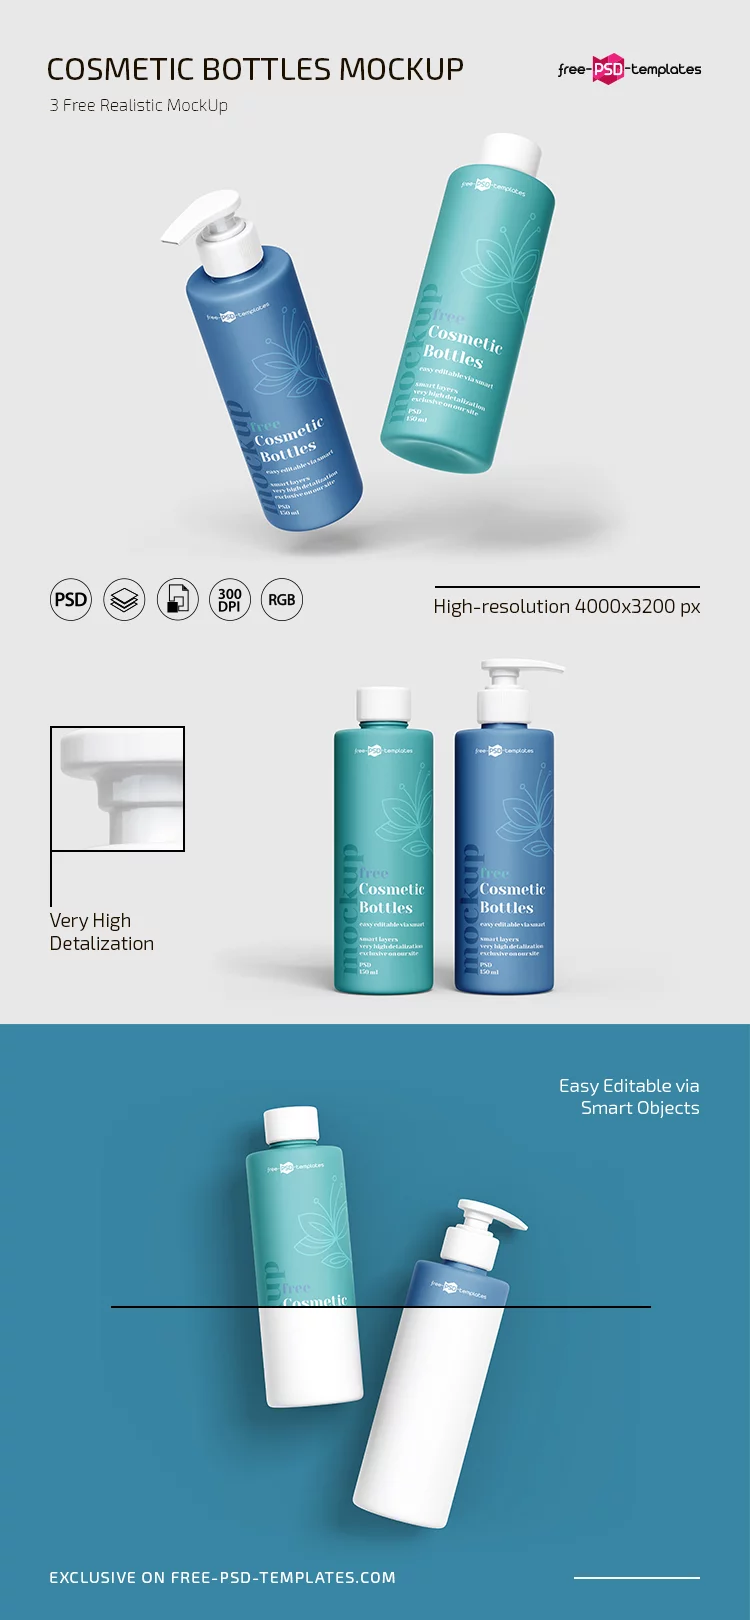 Free PSD Cosmetic Bottles Mockup Templates